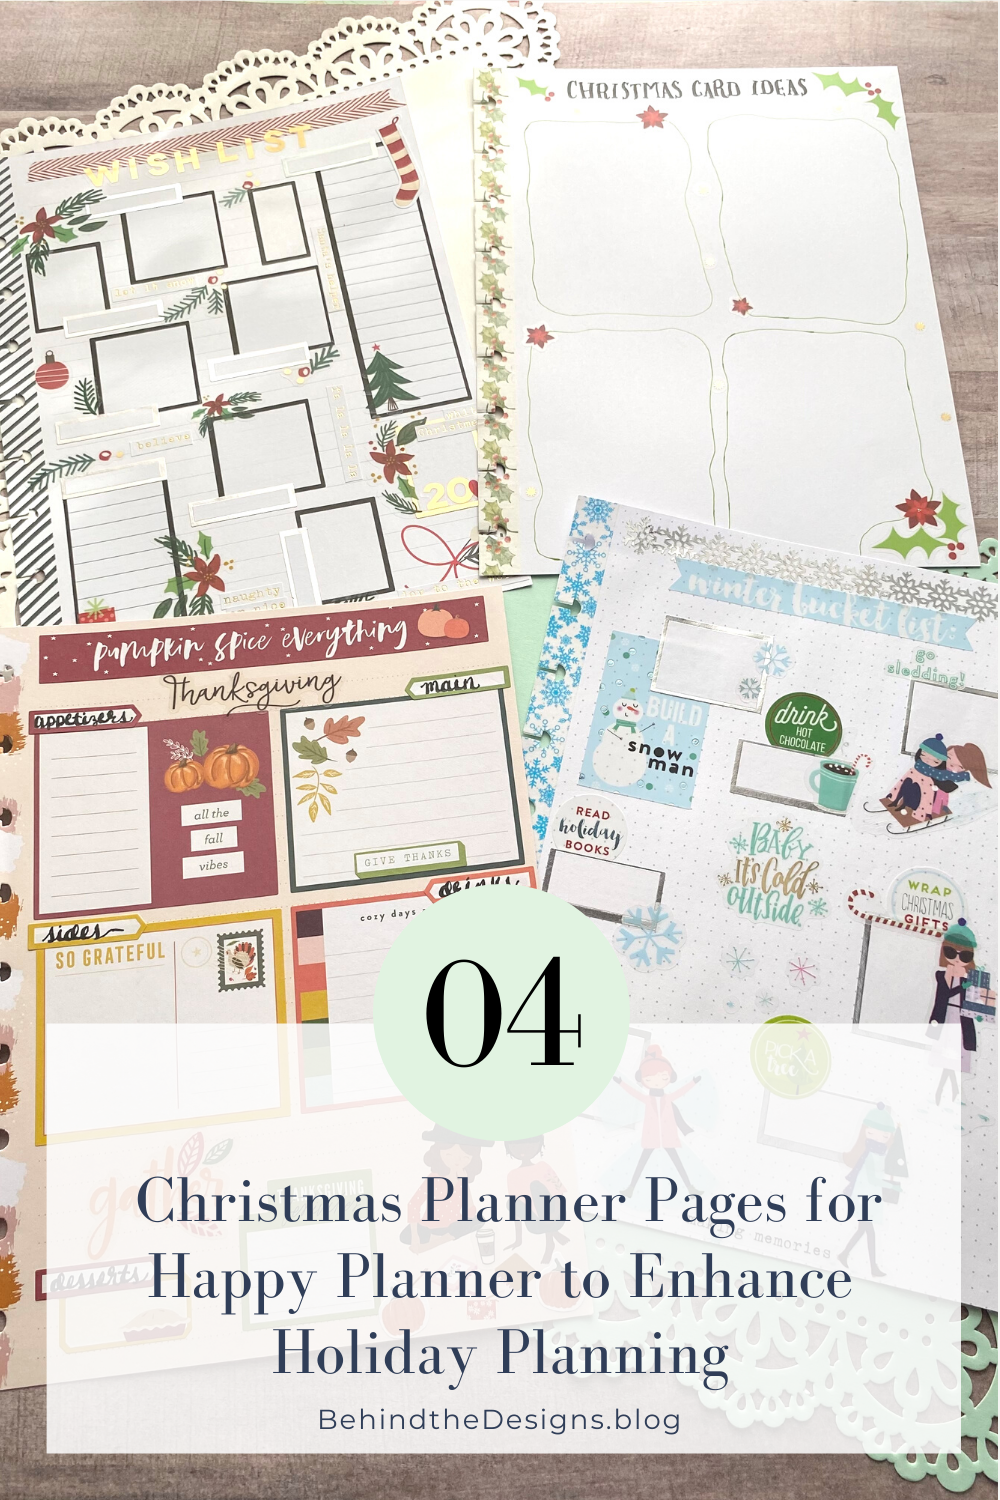 Christmas Planner Pages for the Happy Planner